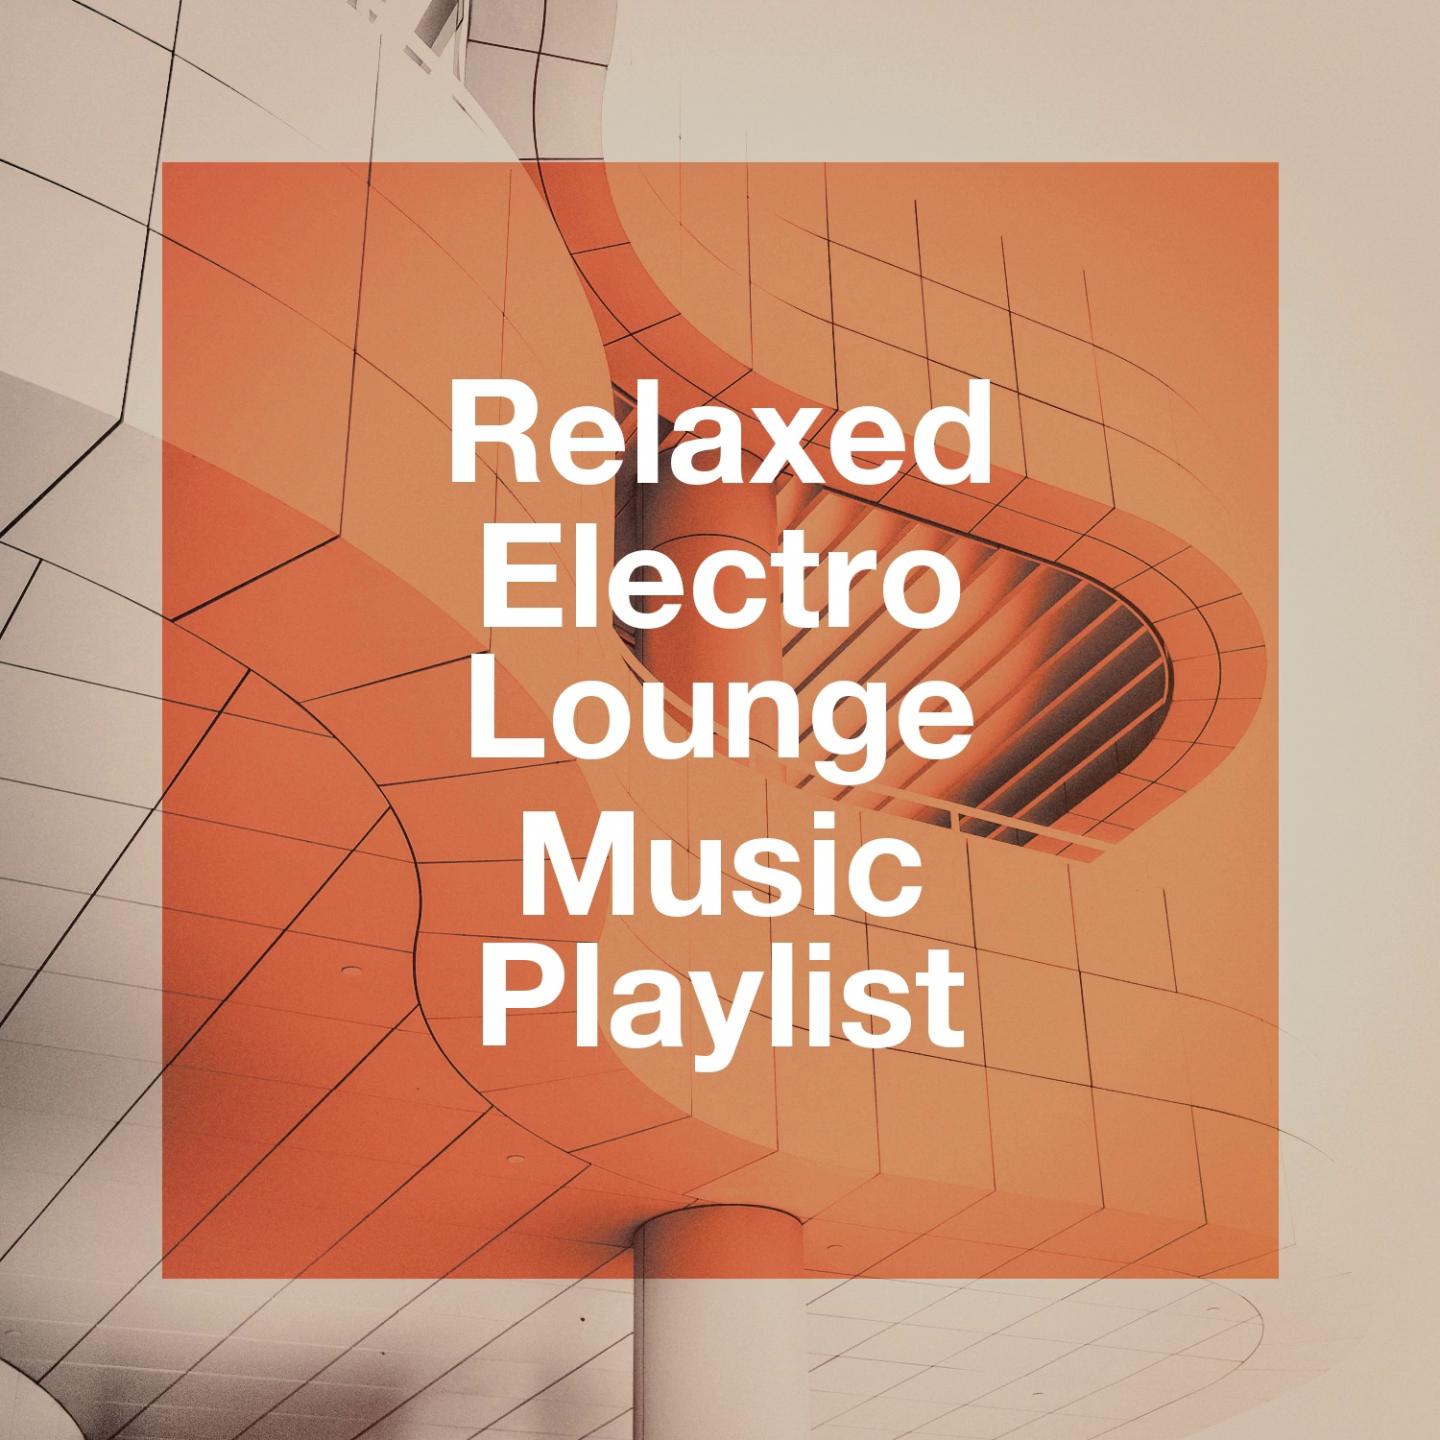 Relaxed Electro Lounge Music Playlist